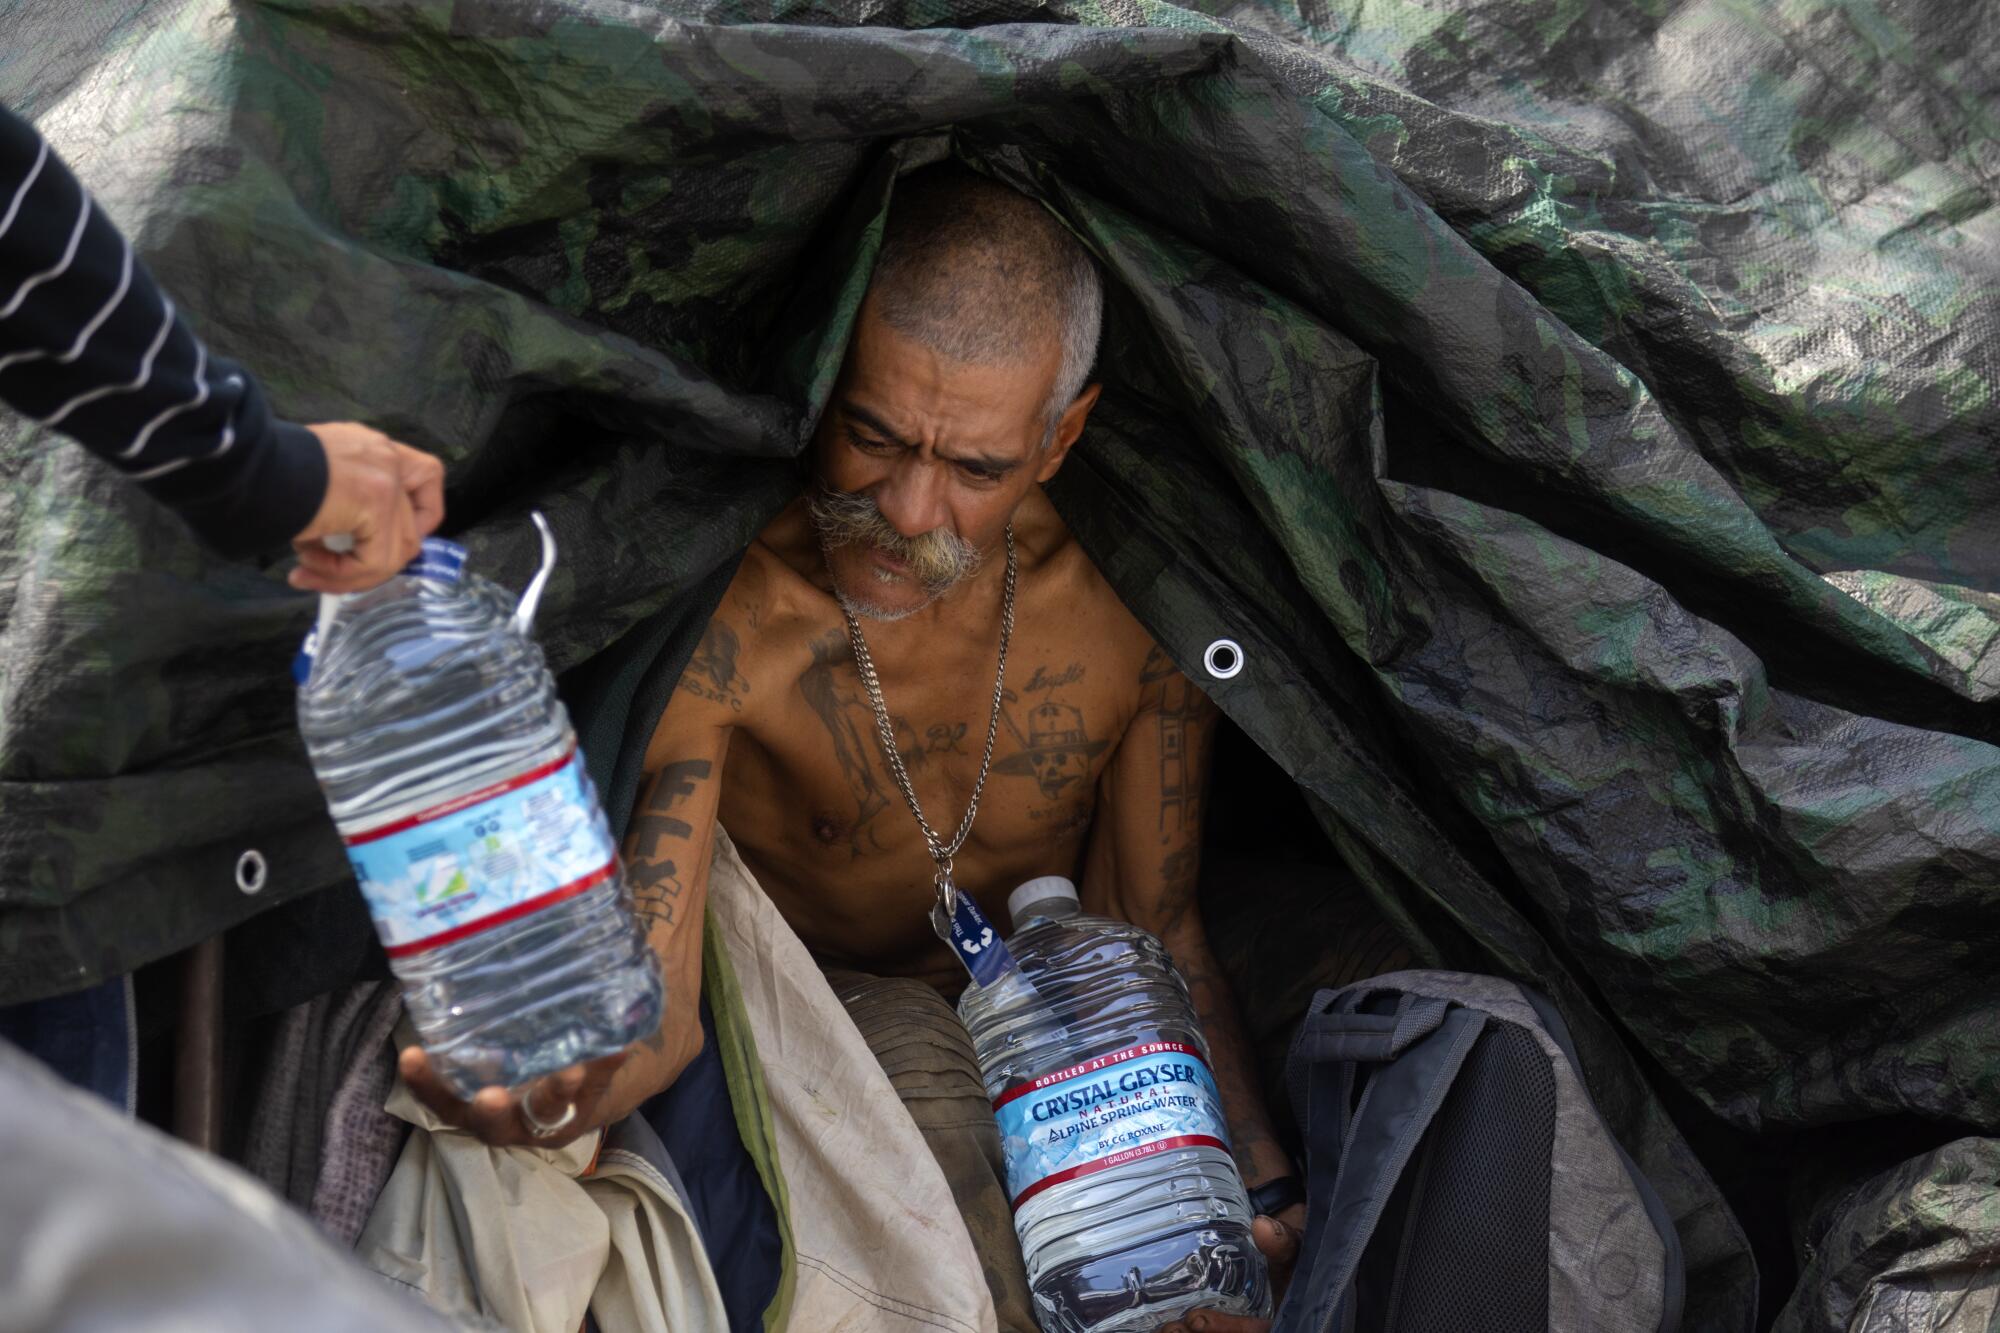 A man holds bottled water in his tent.